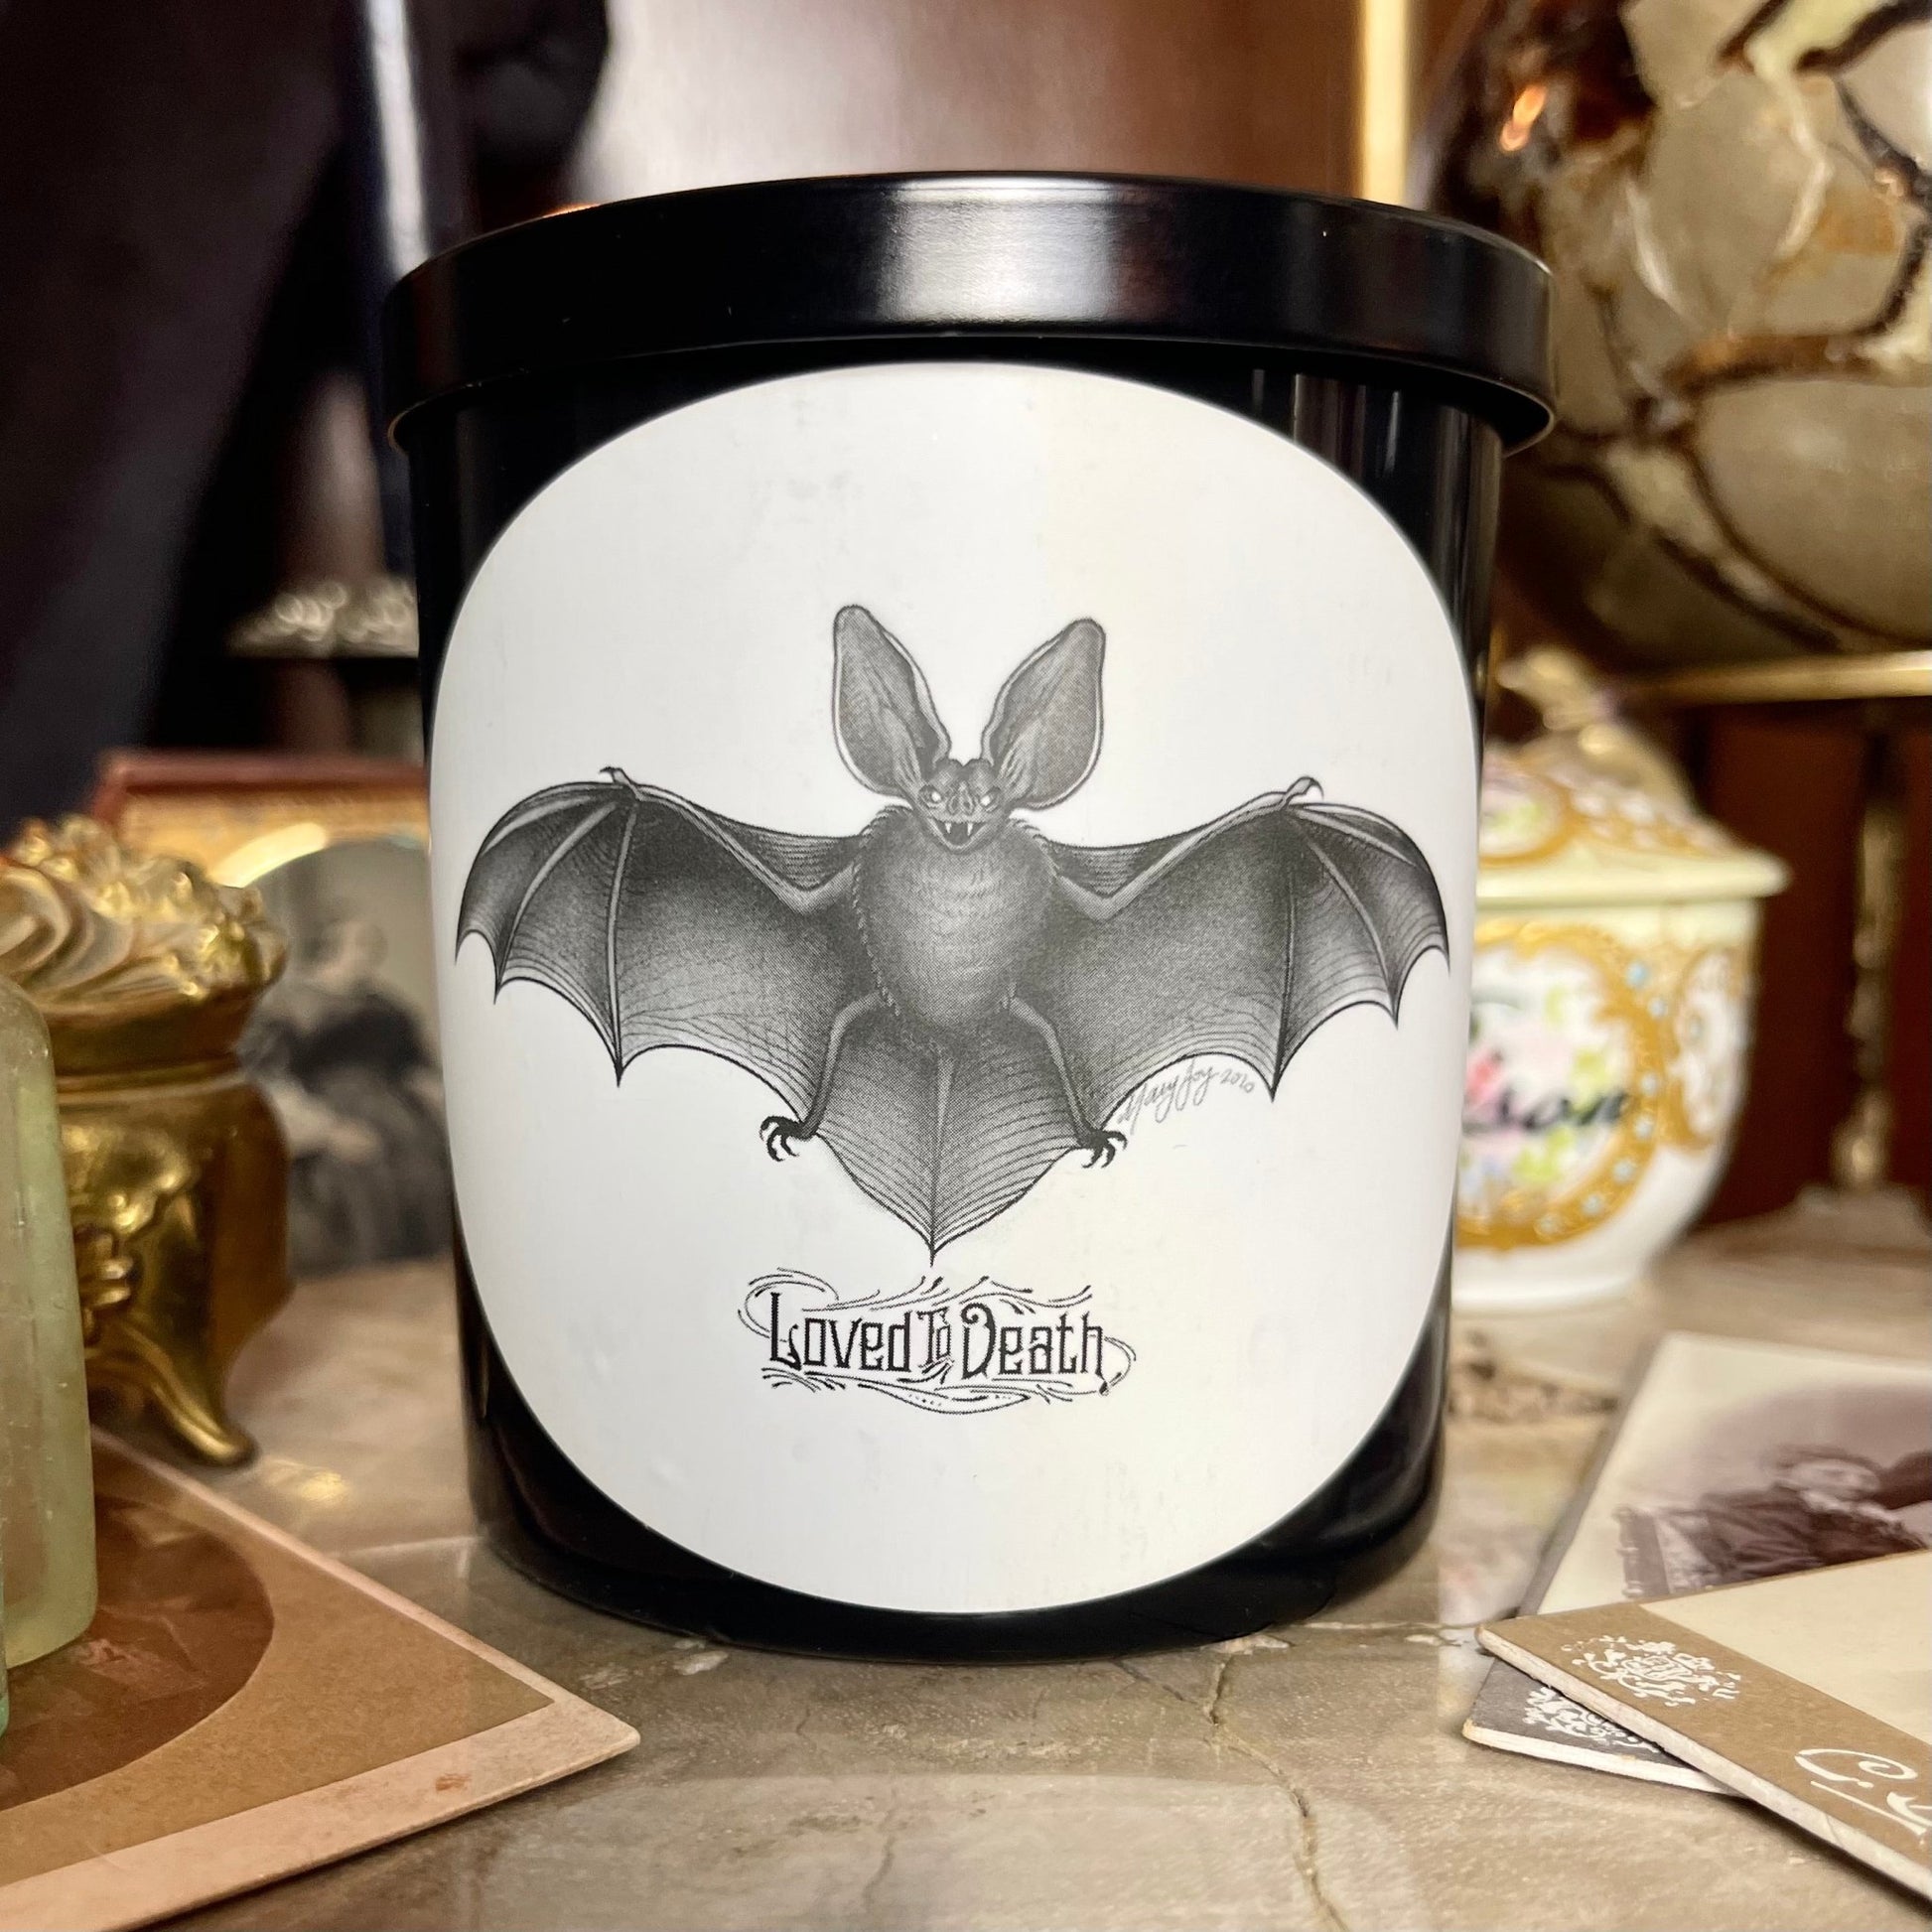 The Bat Candle Boxed Honey Peach - Loved To Death